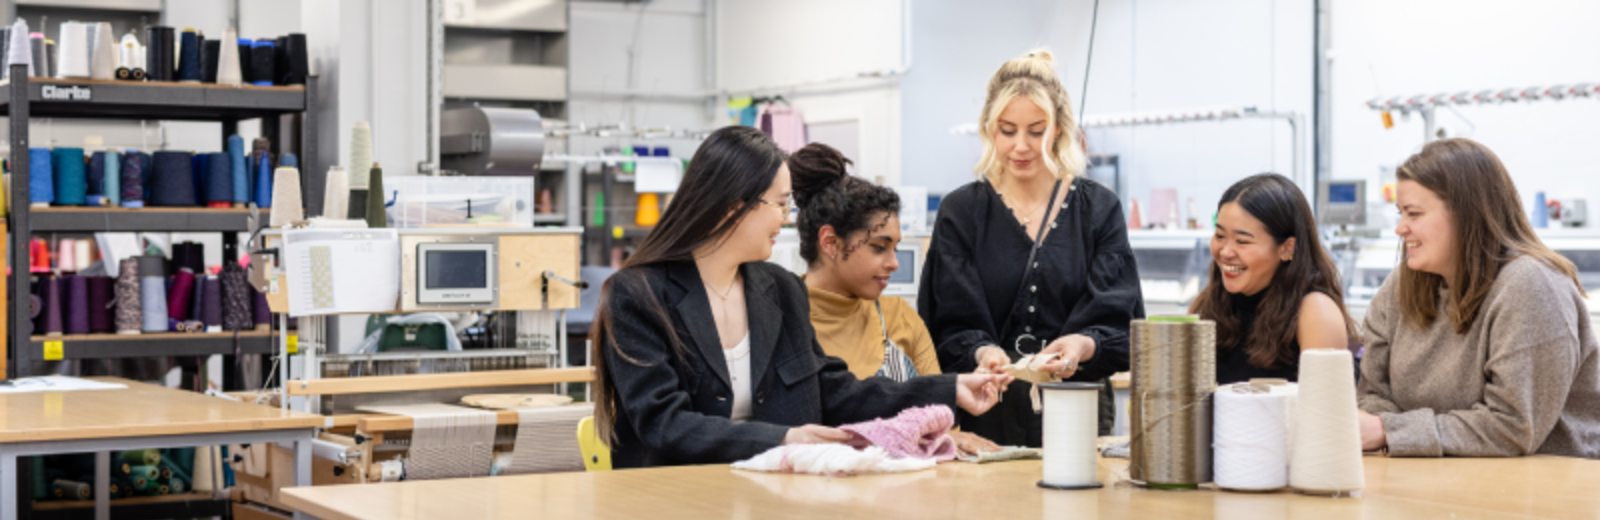 Msc textile sustainability and innovation